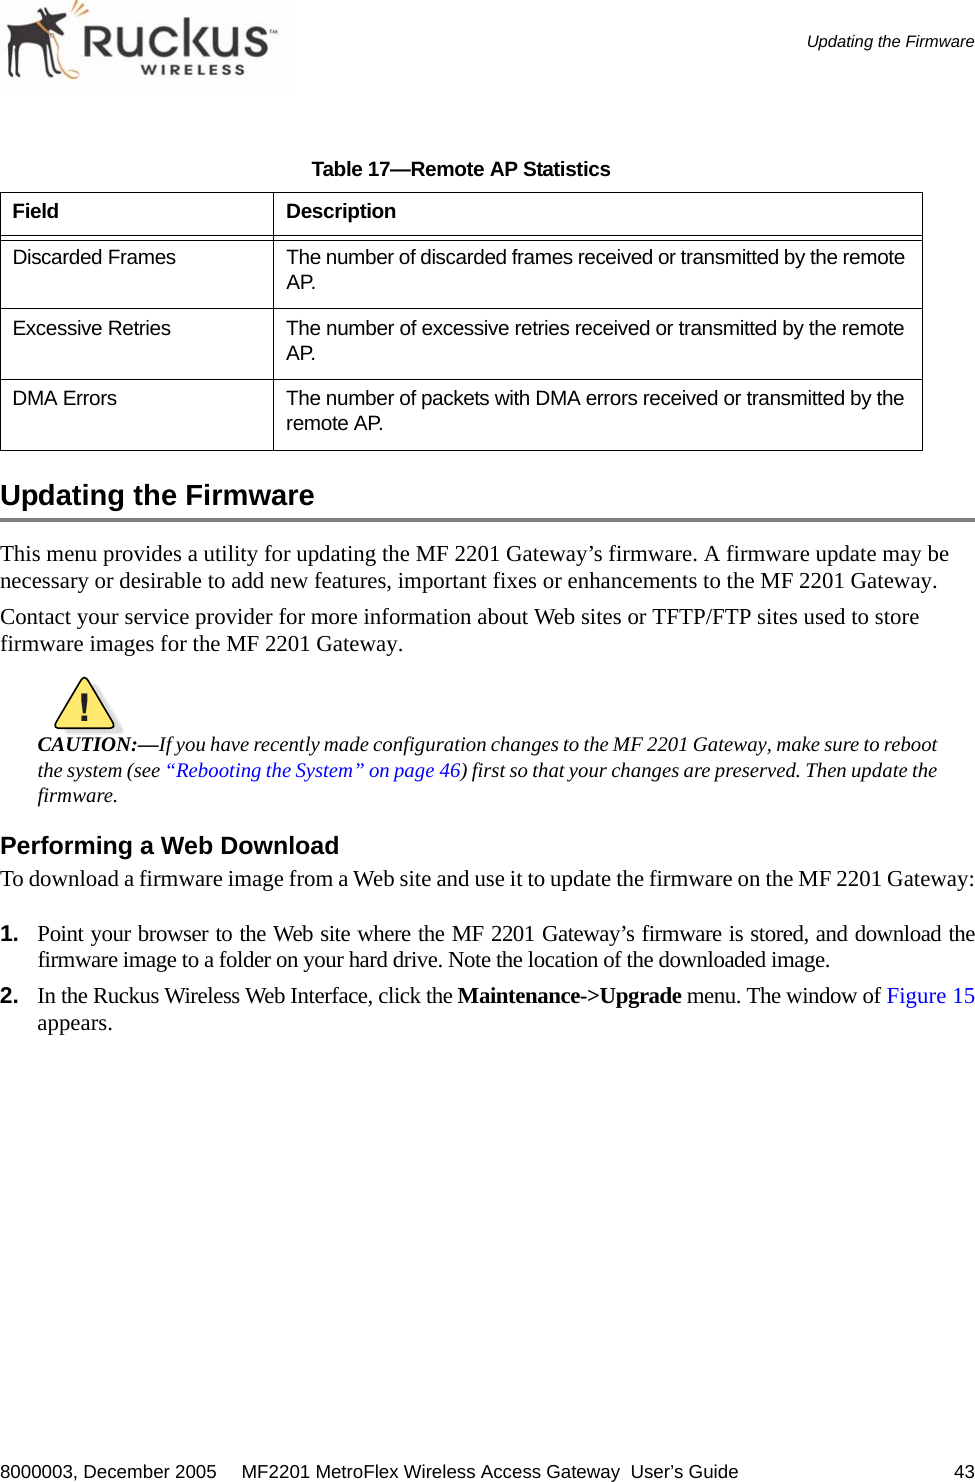 8000003, December 2005  MF2201 MetroFlex Wireless Access Gateway  User’s Guide 43Updating the FirmwareUpdating the FirmwareThis menu provides a utility for updating the MF 2201 Gateway’s firmware. A firmware update may be necessary or desirable to add new features, important fixes or enhancements to the MF 2201 Gateway.Contact your service provider for more information about Web sites or TFTP/FTP sites used to store firmware images for the MF 2201 Gateway.!CAUTION:—If you have recently made configuration changes to the MF 2201 Gateway, make sure to rebootthe system (see “Rebooting the System” on page 46) first so that your changes are preserved. Then update thefirmware.Performing a Web DownloadTo download a firmware image from a Web site and use it to update the firmware on the MF 2201 Gateway:1. Point your browser to the Web site where the MF 2201 Gateway’s firmware is stored, and download thefirmware image to a folder on your hard drive. Note the location of the downloaded image.2. In the Ruckus Wireless Web Interface, click the Maintenance-&gt;Upgrade menu. The window of Figure 15appears.Discarded Frames The number of discarded frames received or transmitted by the remote AP.Excessive Retries The number of excessive retries received or transmitted by the remote AP.DMA Errors The number of packets with DMA errors received or transmitted by the remote AP.Table 17—Remote AP StatisticsField Description